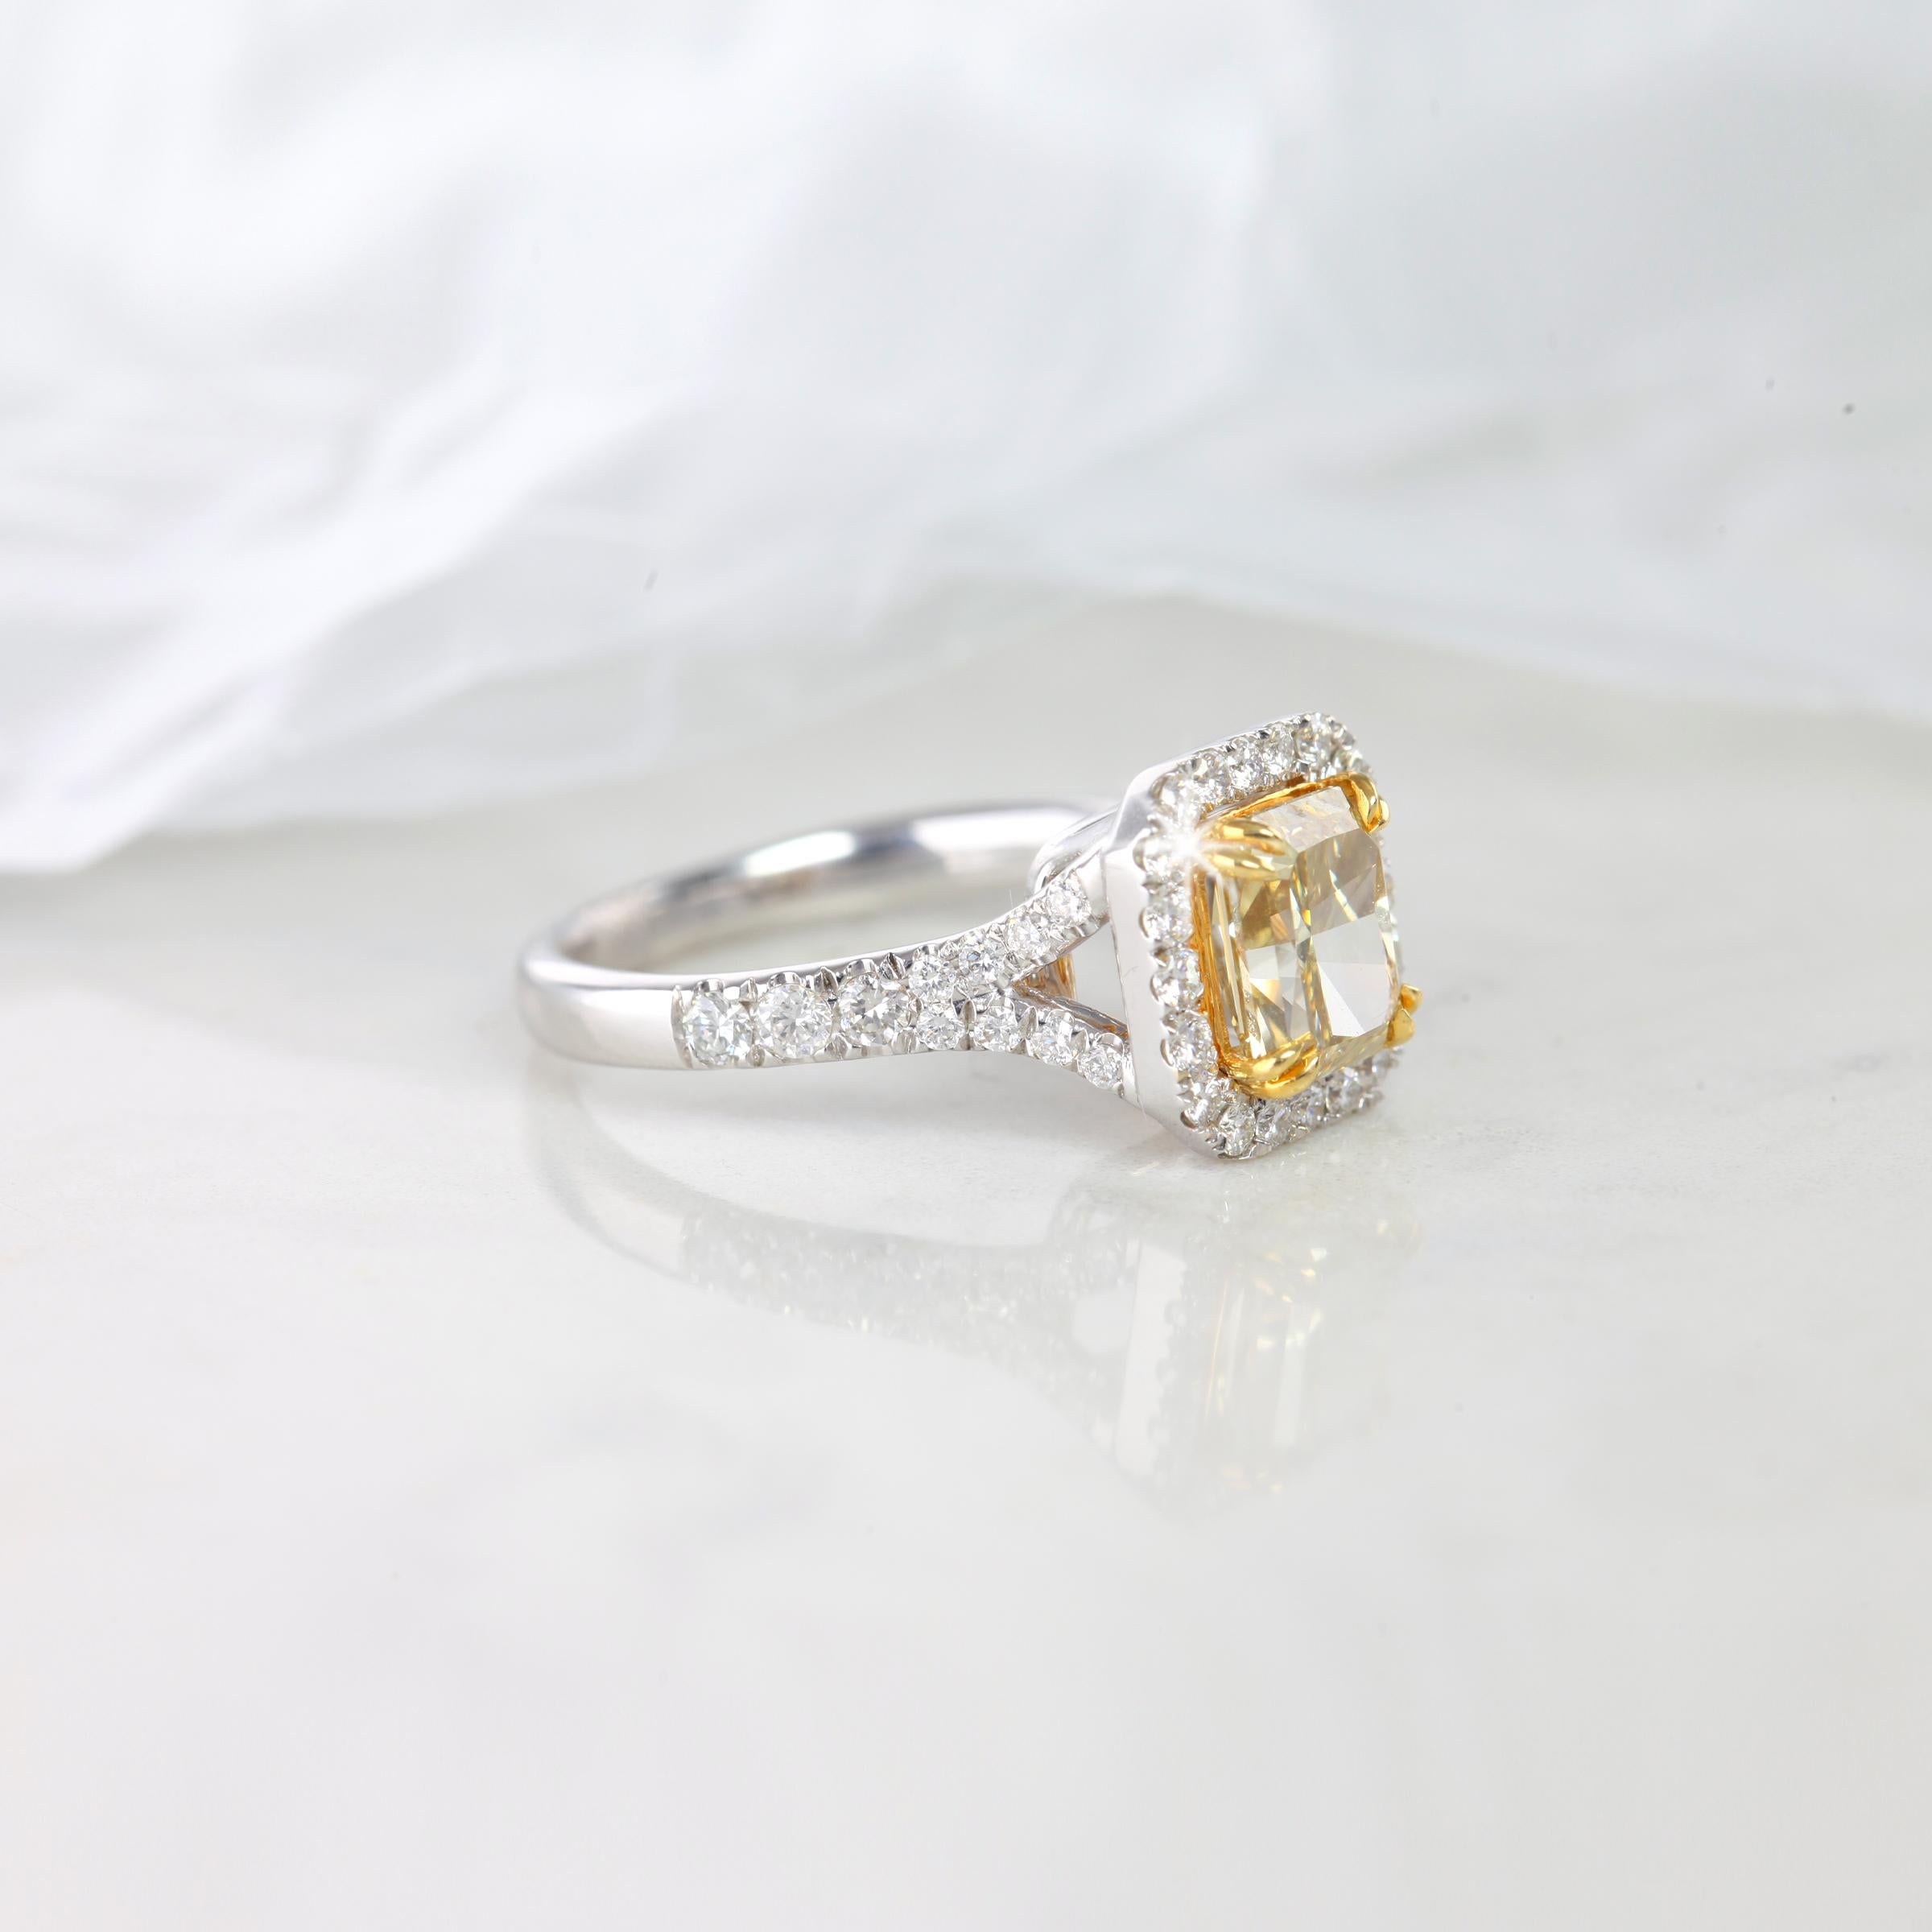 Gold metal: 18k White Gold
Diamond Shape: Radiant Cut
Main Stone: 1.89 Carats
Side Stones: 1.25 Carats
Total Carat Weight: Carats
Color:  Fancy Intense Brownish Yellow 
Clarity: VS2
Comments: Avangarde Ring
Cut: Excellent
All products comes with